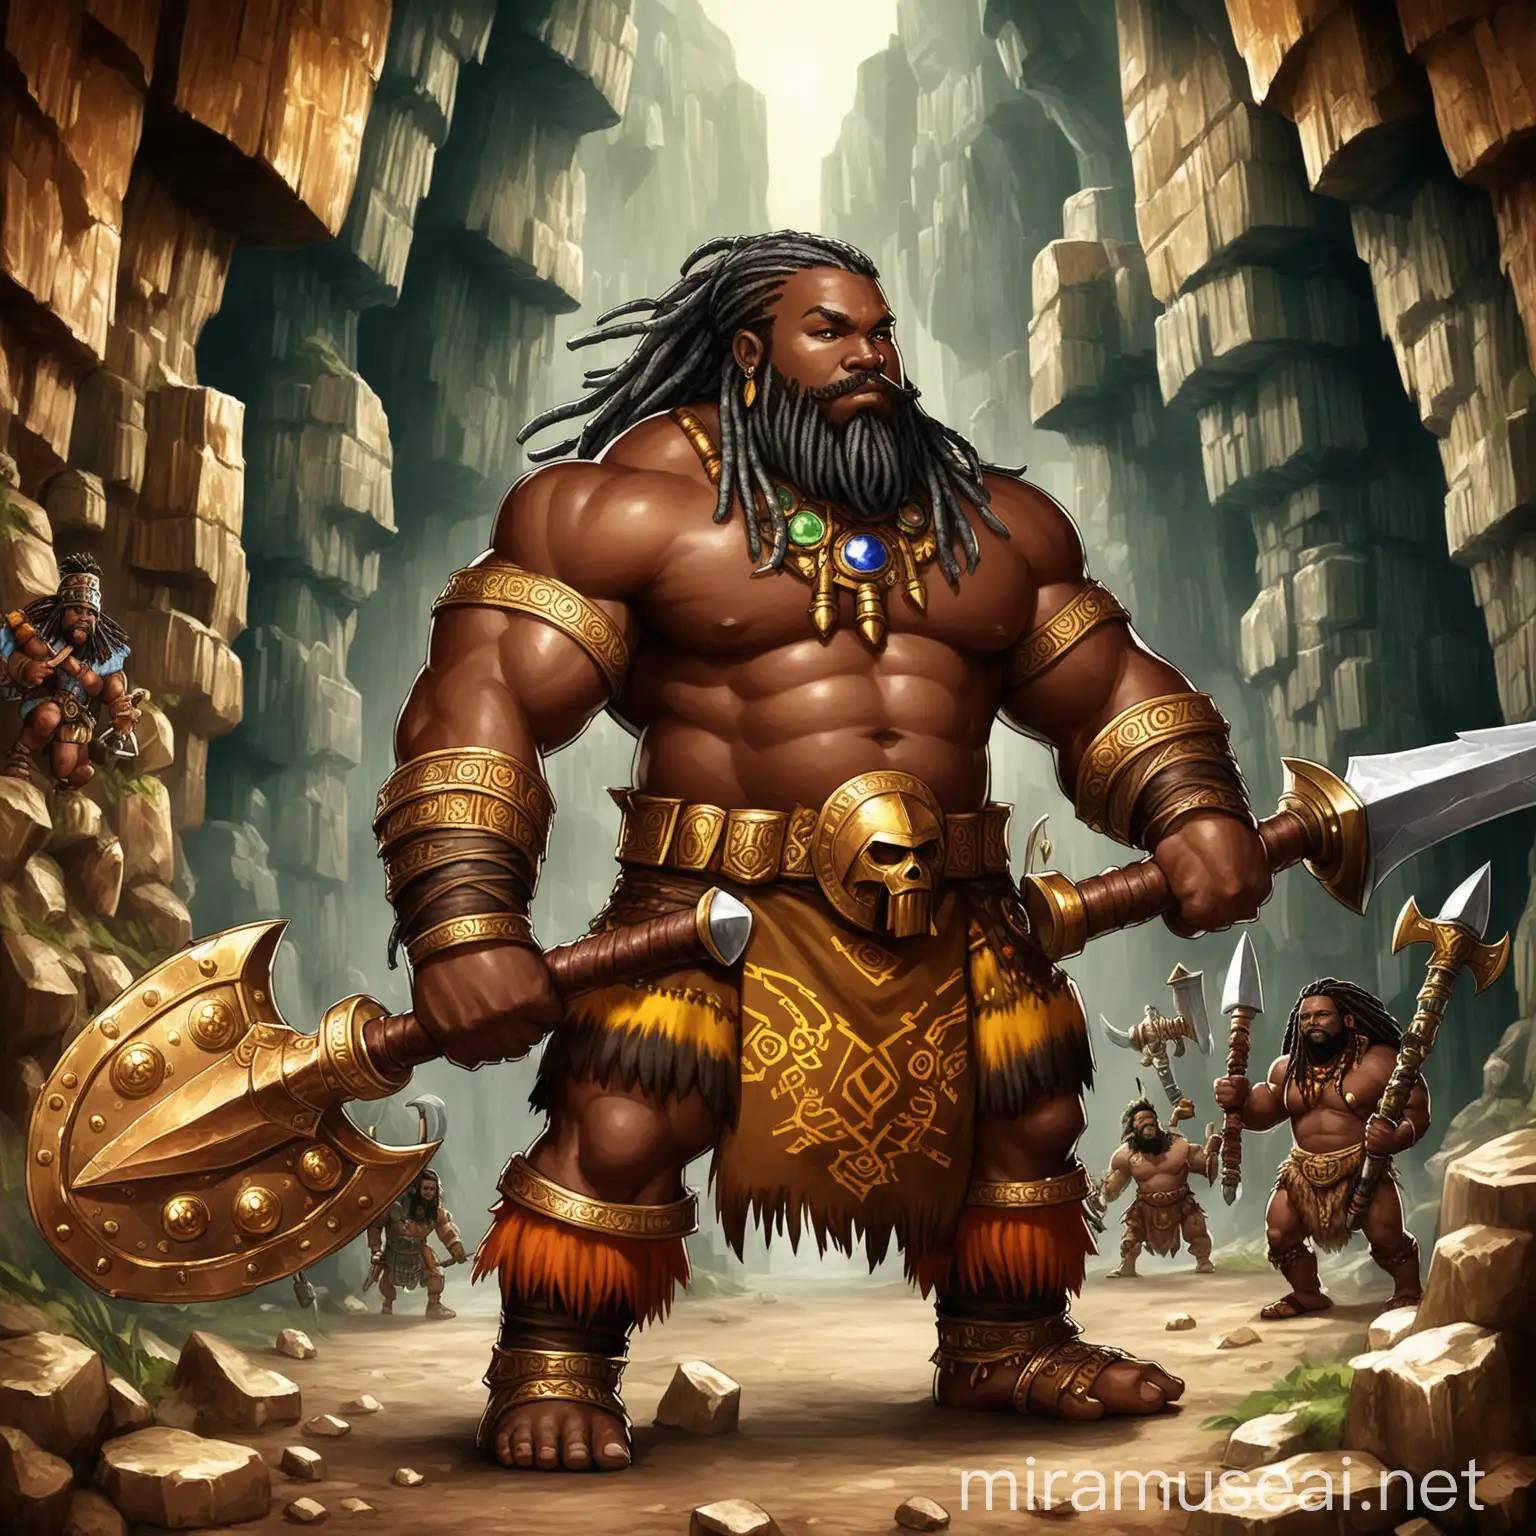 fantasy role playing game character, dwarf, barbarian, west african features, beard and hair in dred locs, oversized muscles, weapon of choice is artfully crafted warhammer, wild magic, minimal clothing of west african patterns prints and animal hides, skin is flecked with black and grey with gold streaks running through it similar to granite, background of caverns full of precious metals and gems and a great stone city